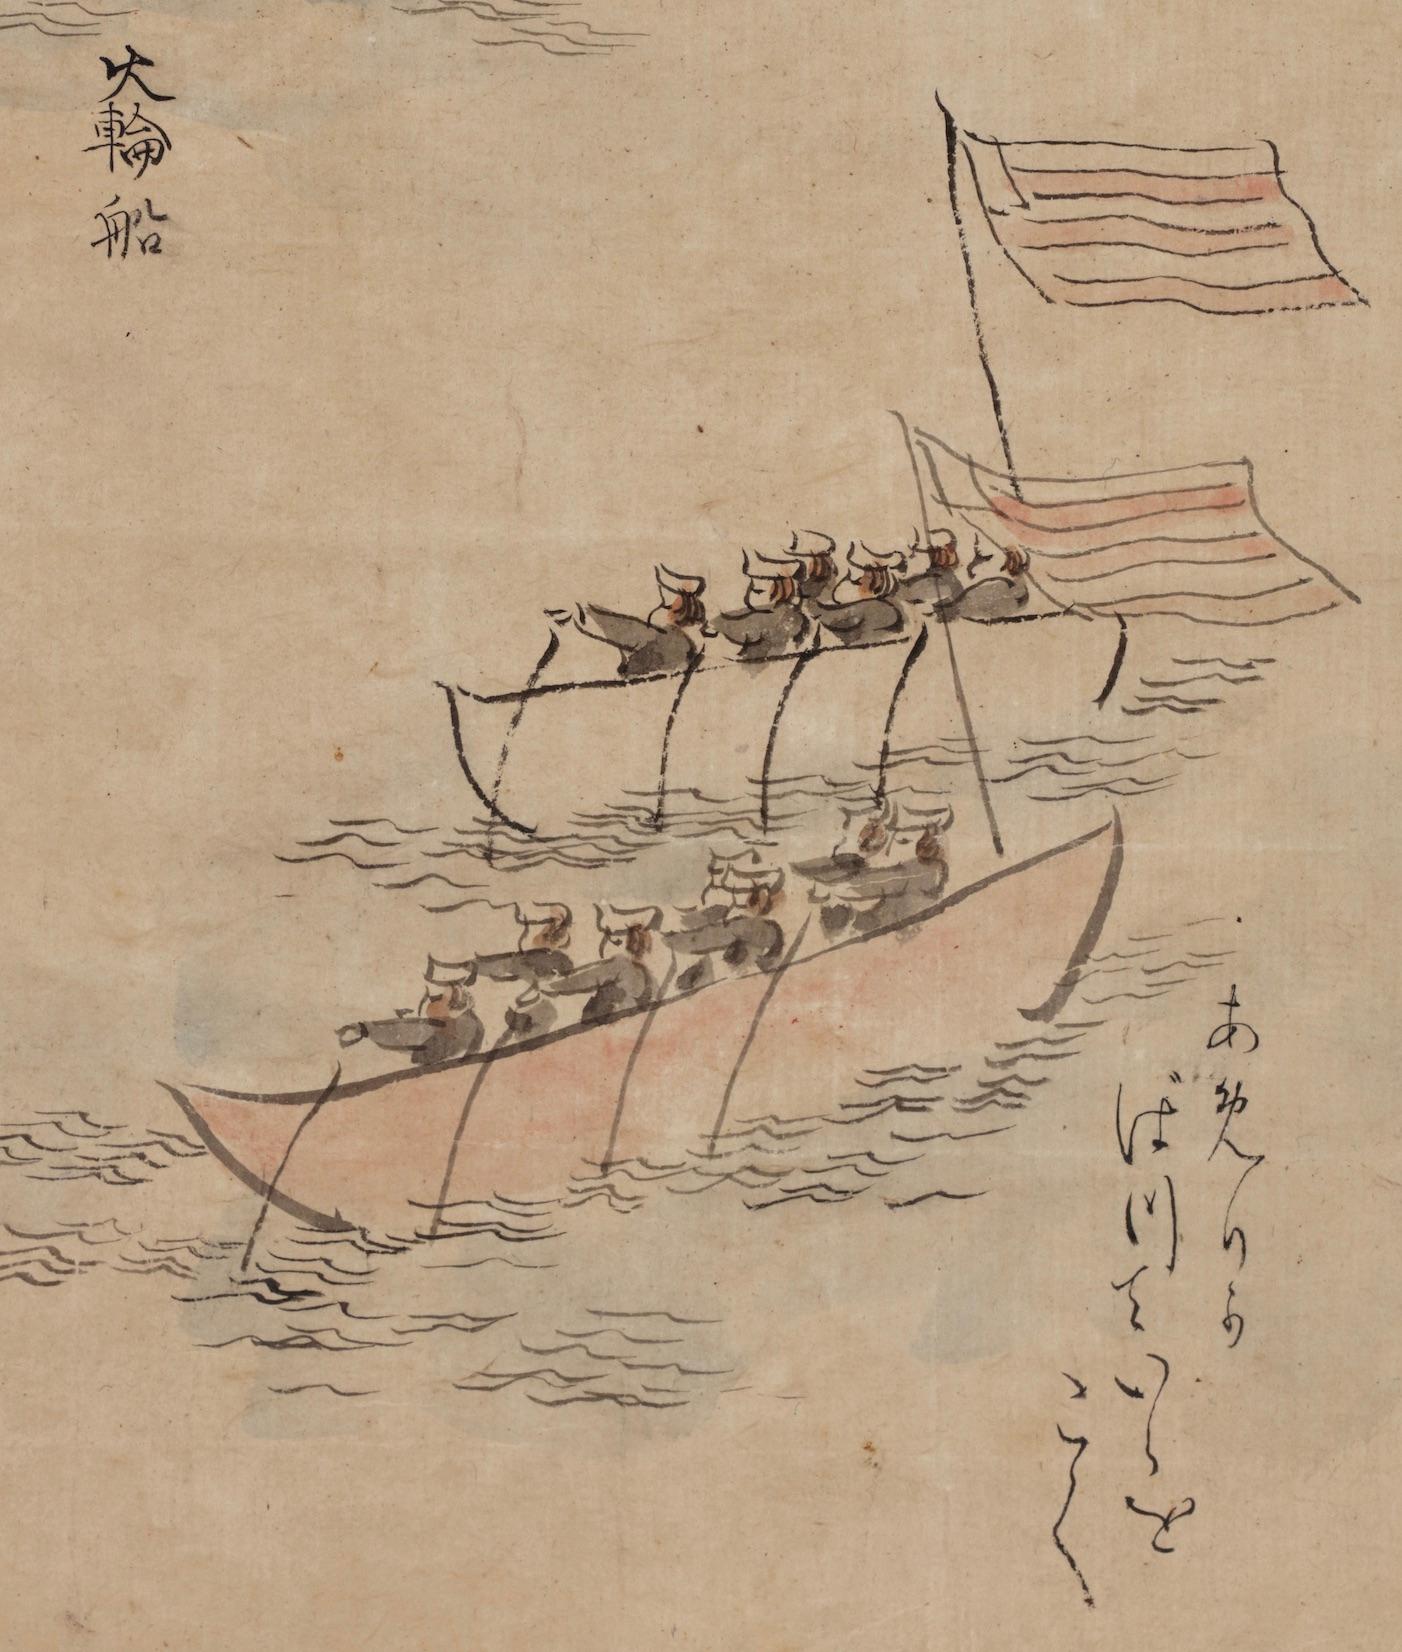 Scroll painting of the American ship commanded by Commodore Matthew Perry - Edo Painting by Ukita Ikkei